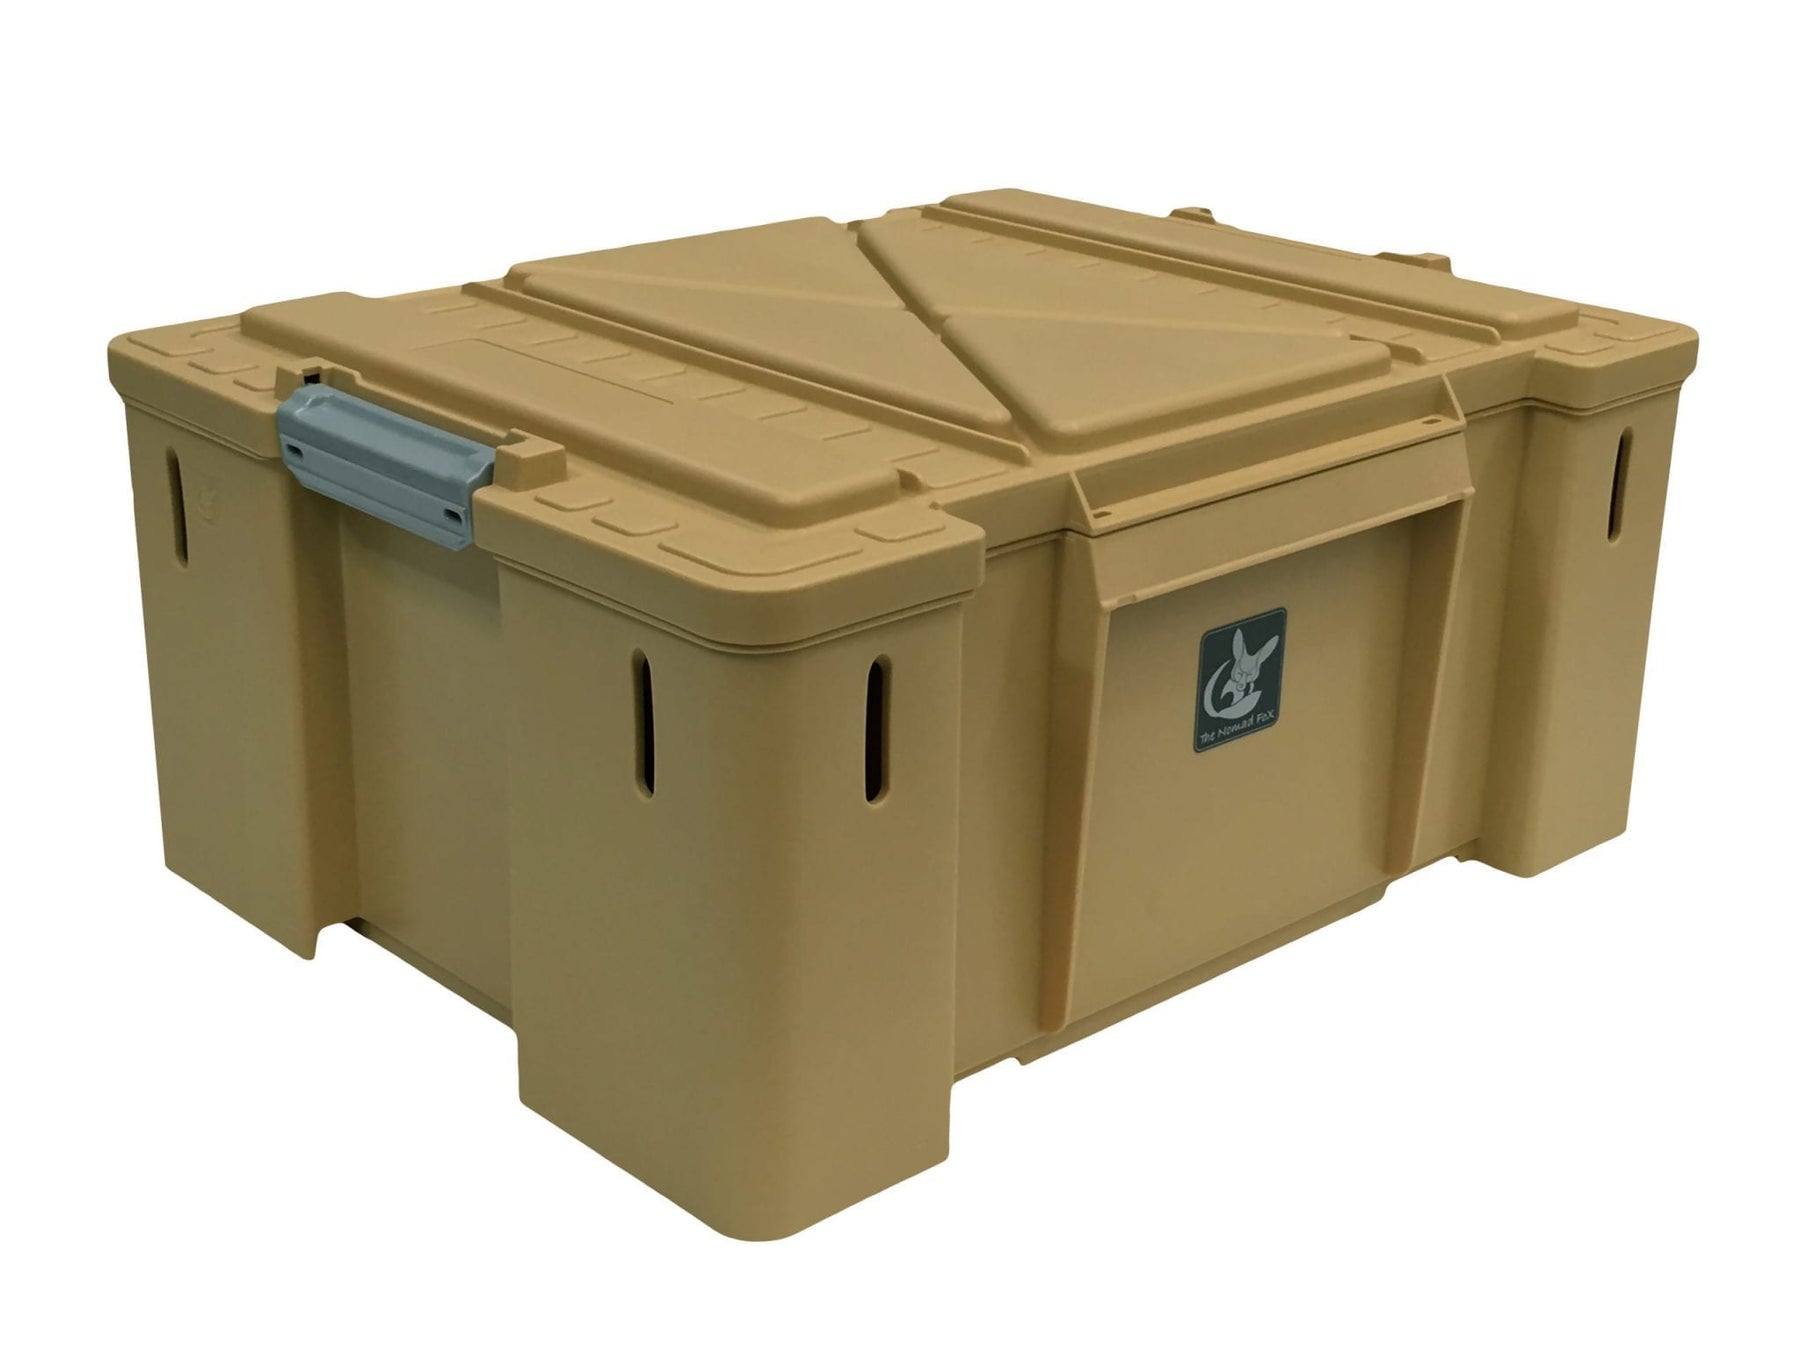 Well-Designed, Injection-Molded Heavy Duty Storage Totes for Off-Road  Vehicles - Core77